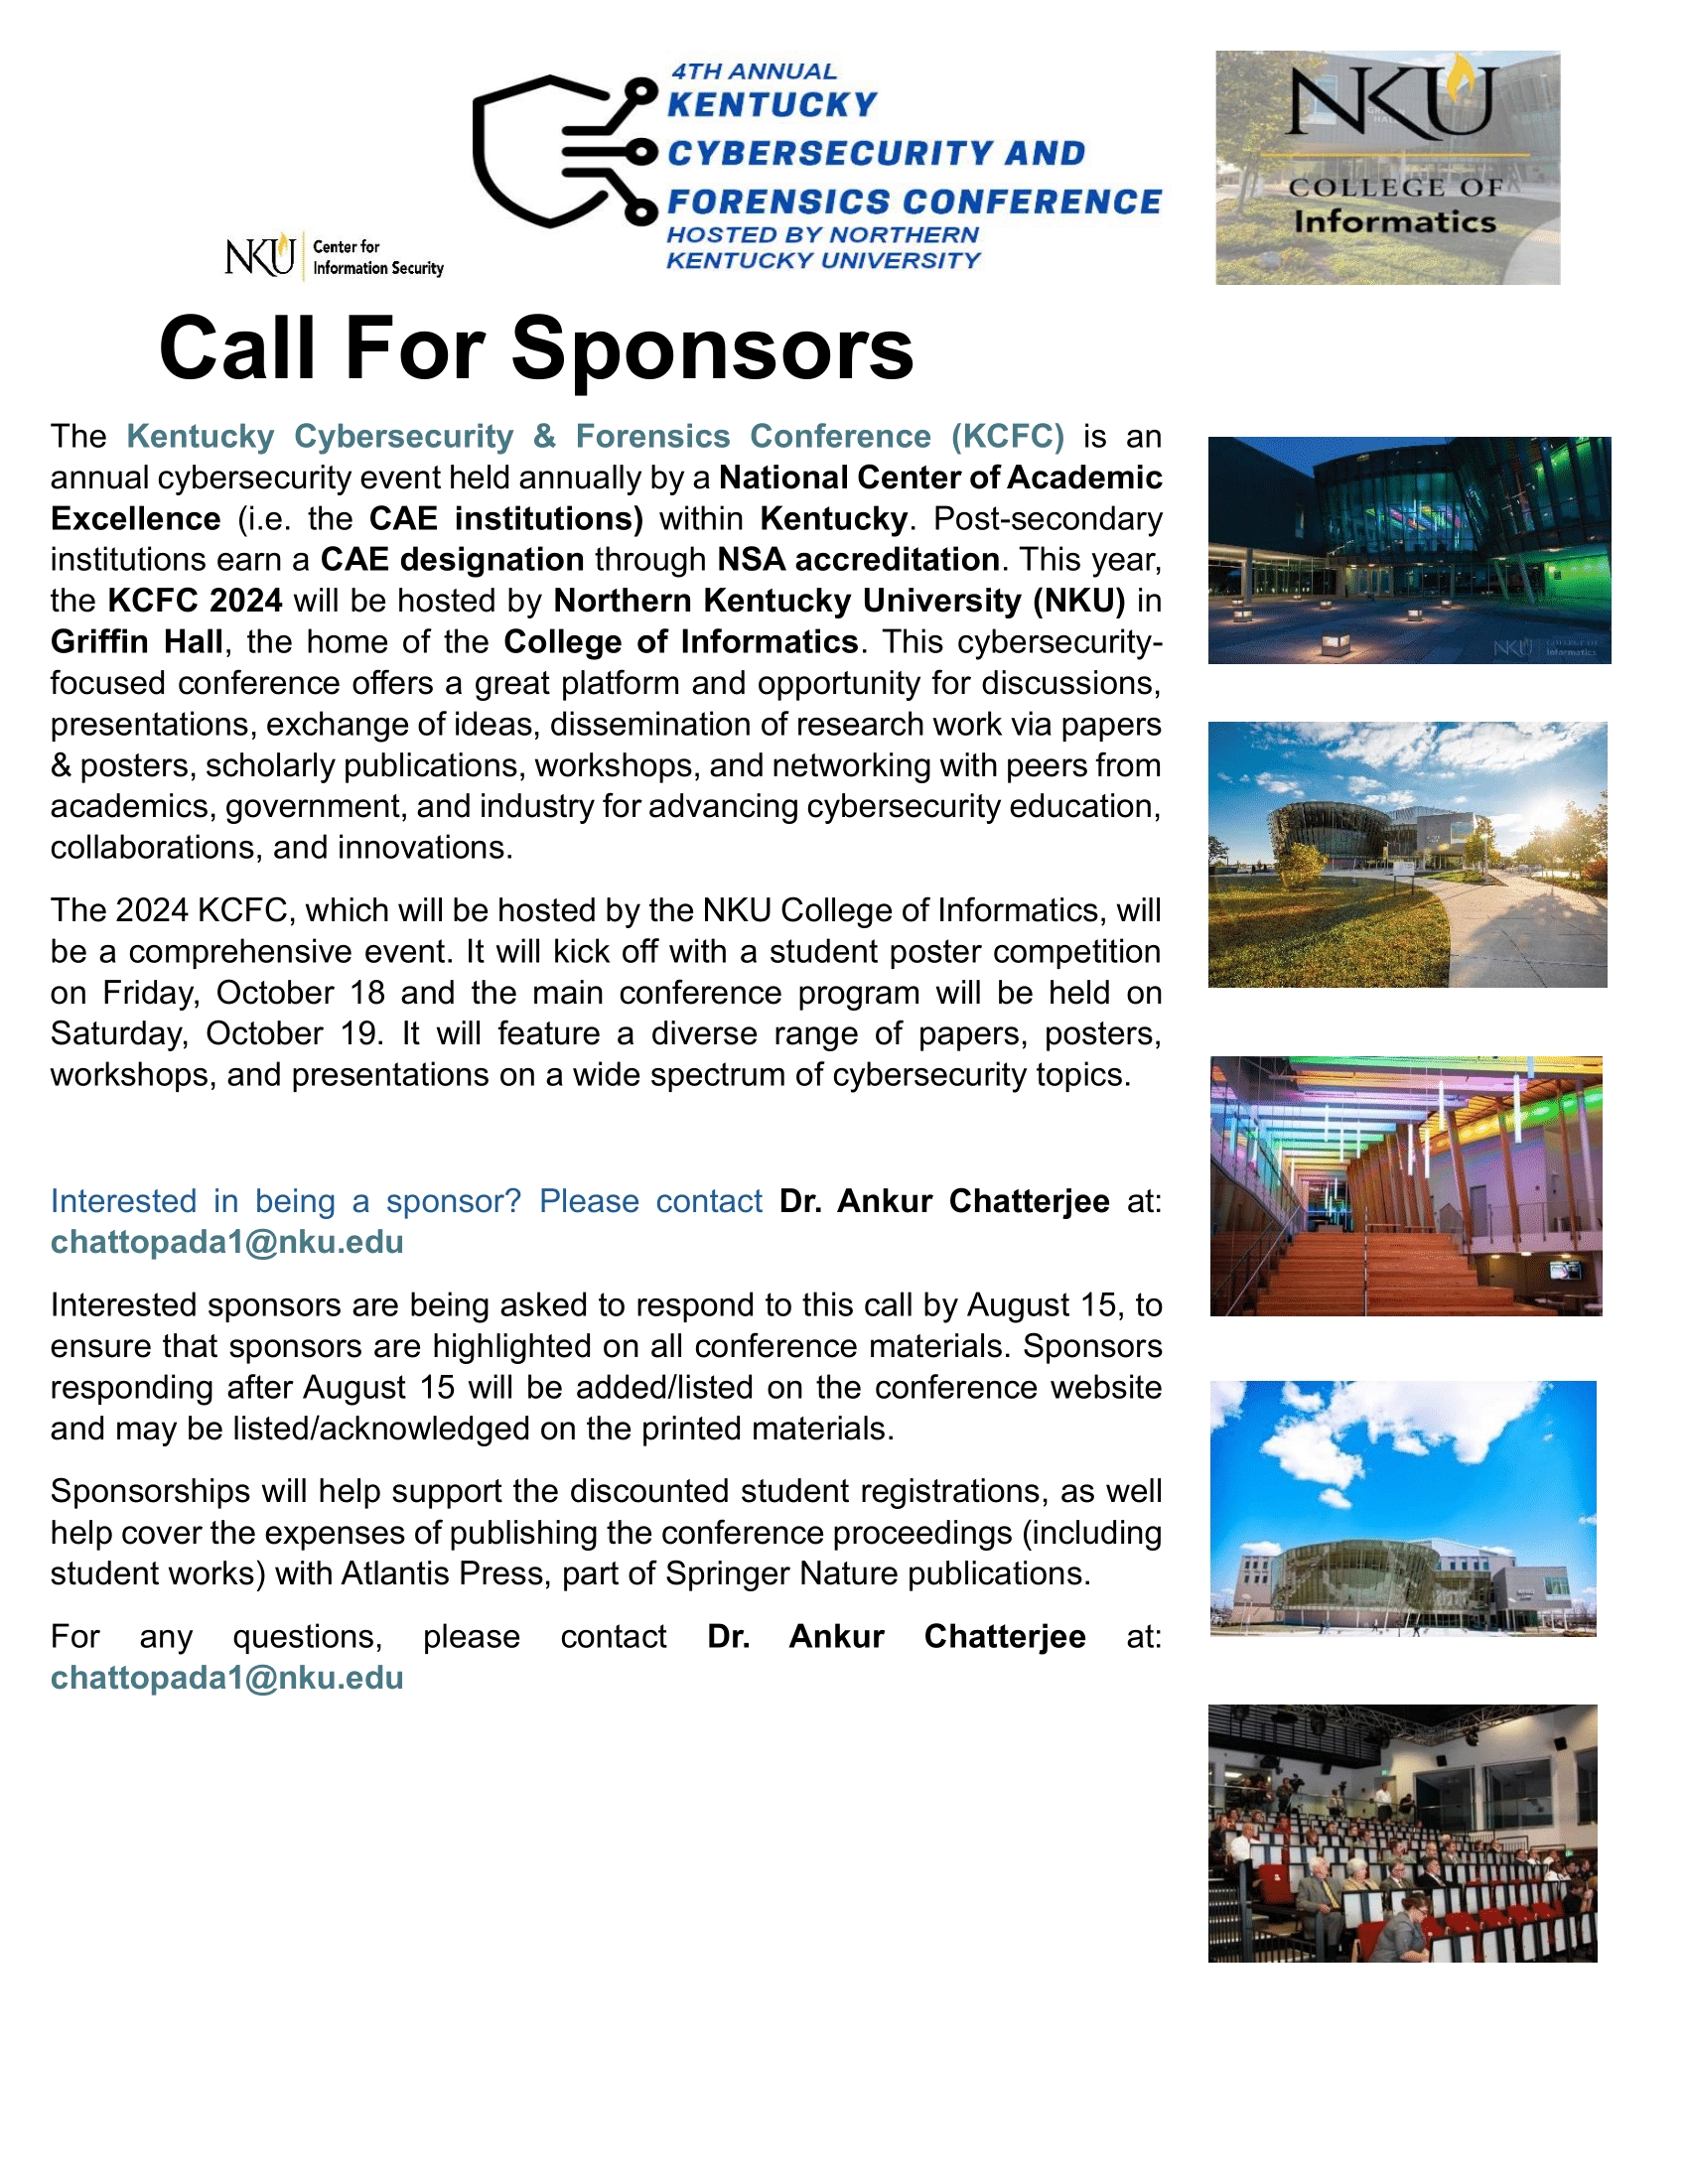 Call for sponsors information. Contact chattopada1@nku.edu for more infromation.